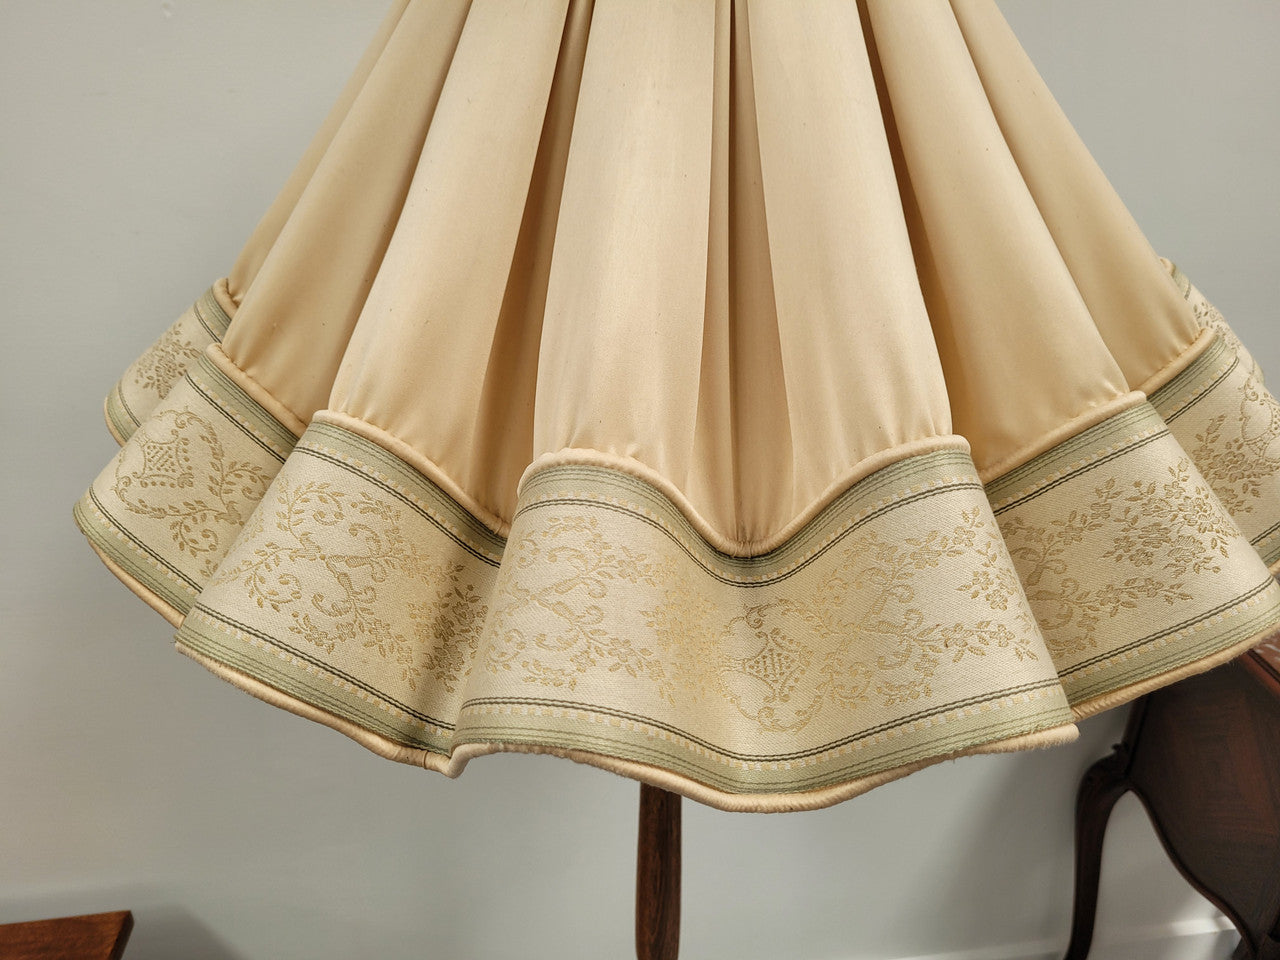 Vintage Ballerina standard lampshade. In original condition with some small marks to fabric.